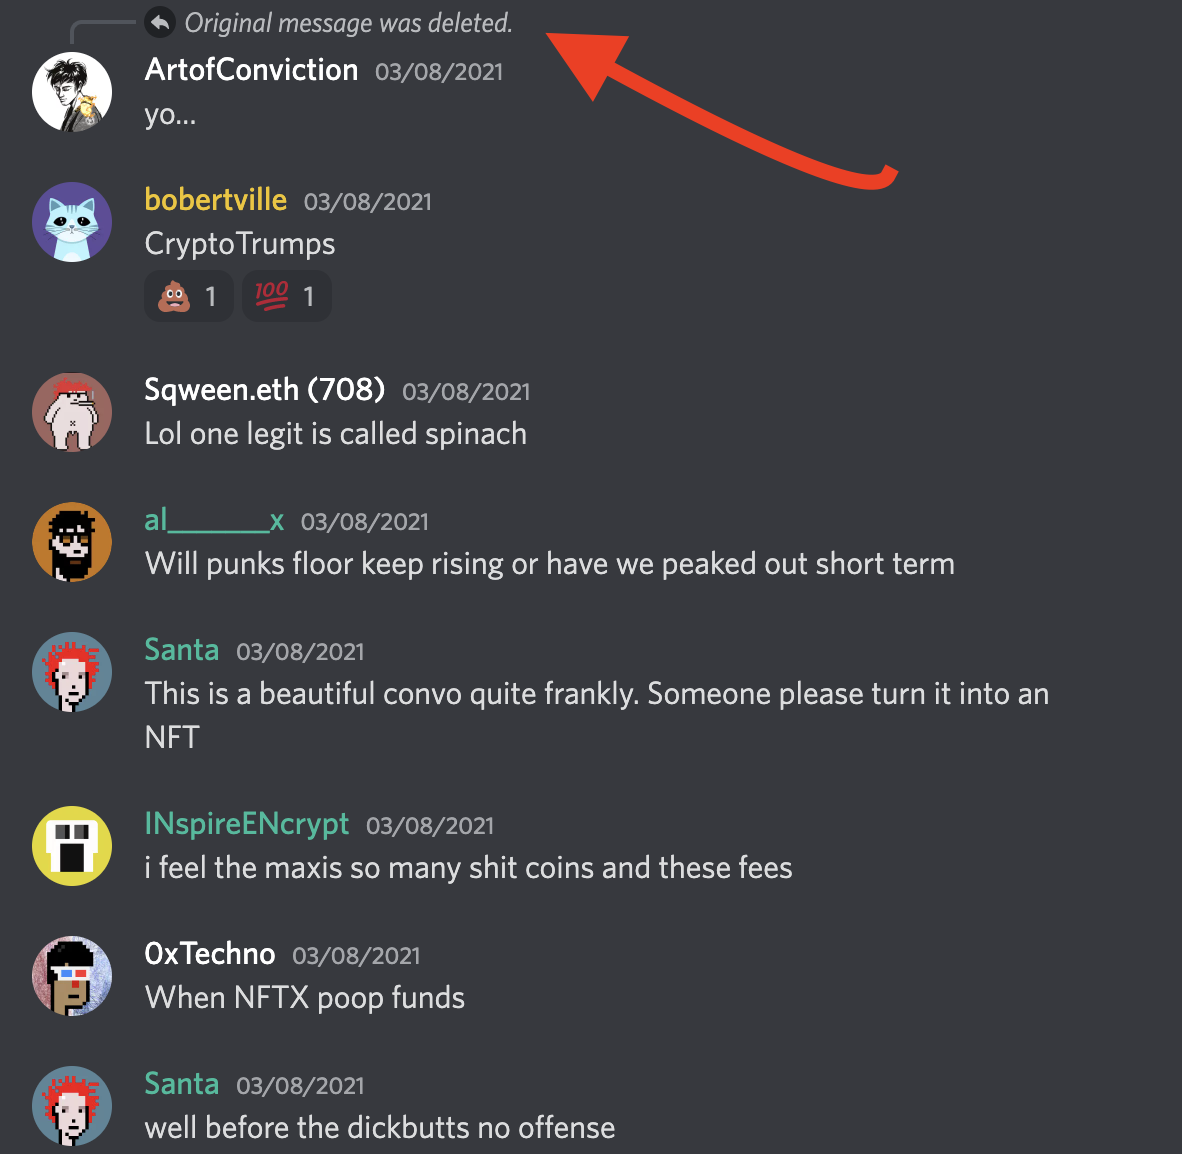 (The very first mention of “CryptoDickbutts in the Punks discord has been deleted. So I’ve linked to the general initial discussion instead here: https://discord.com/channels/329381334701178885/567343234687303700/818714020387094528 ) 